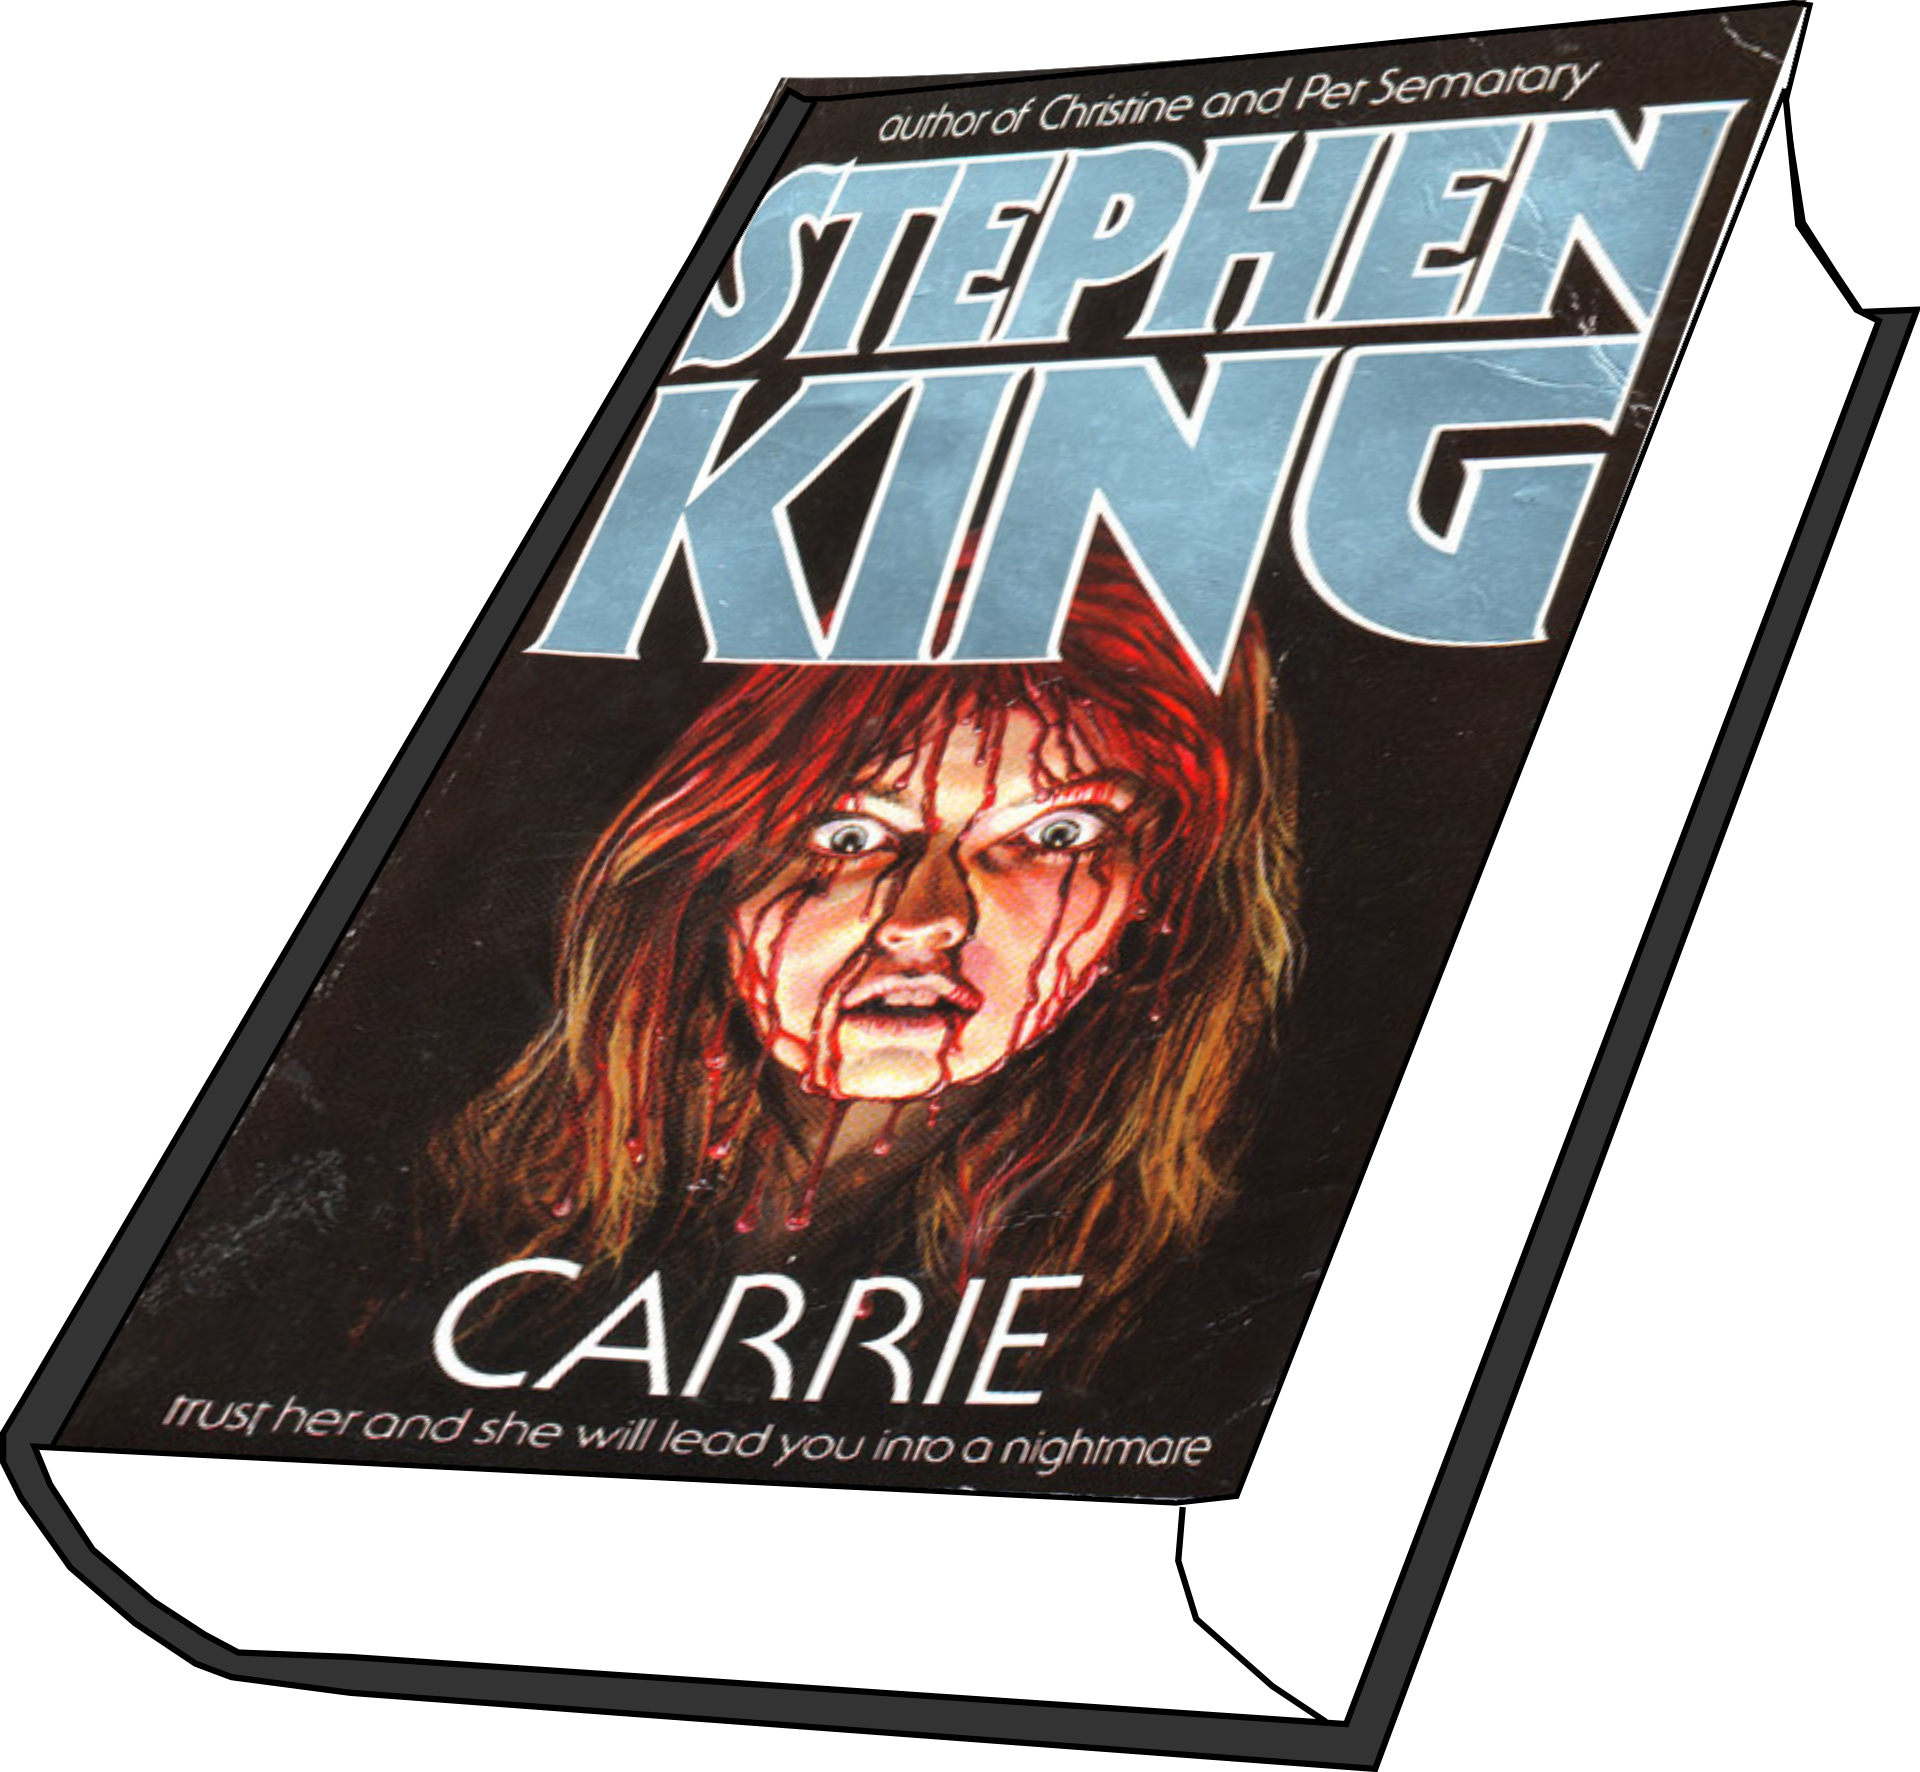 Carrie by Stephen King - First Amendment Museum